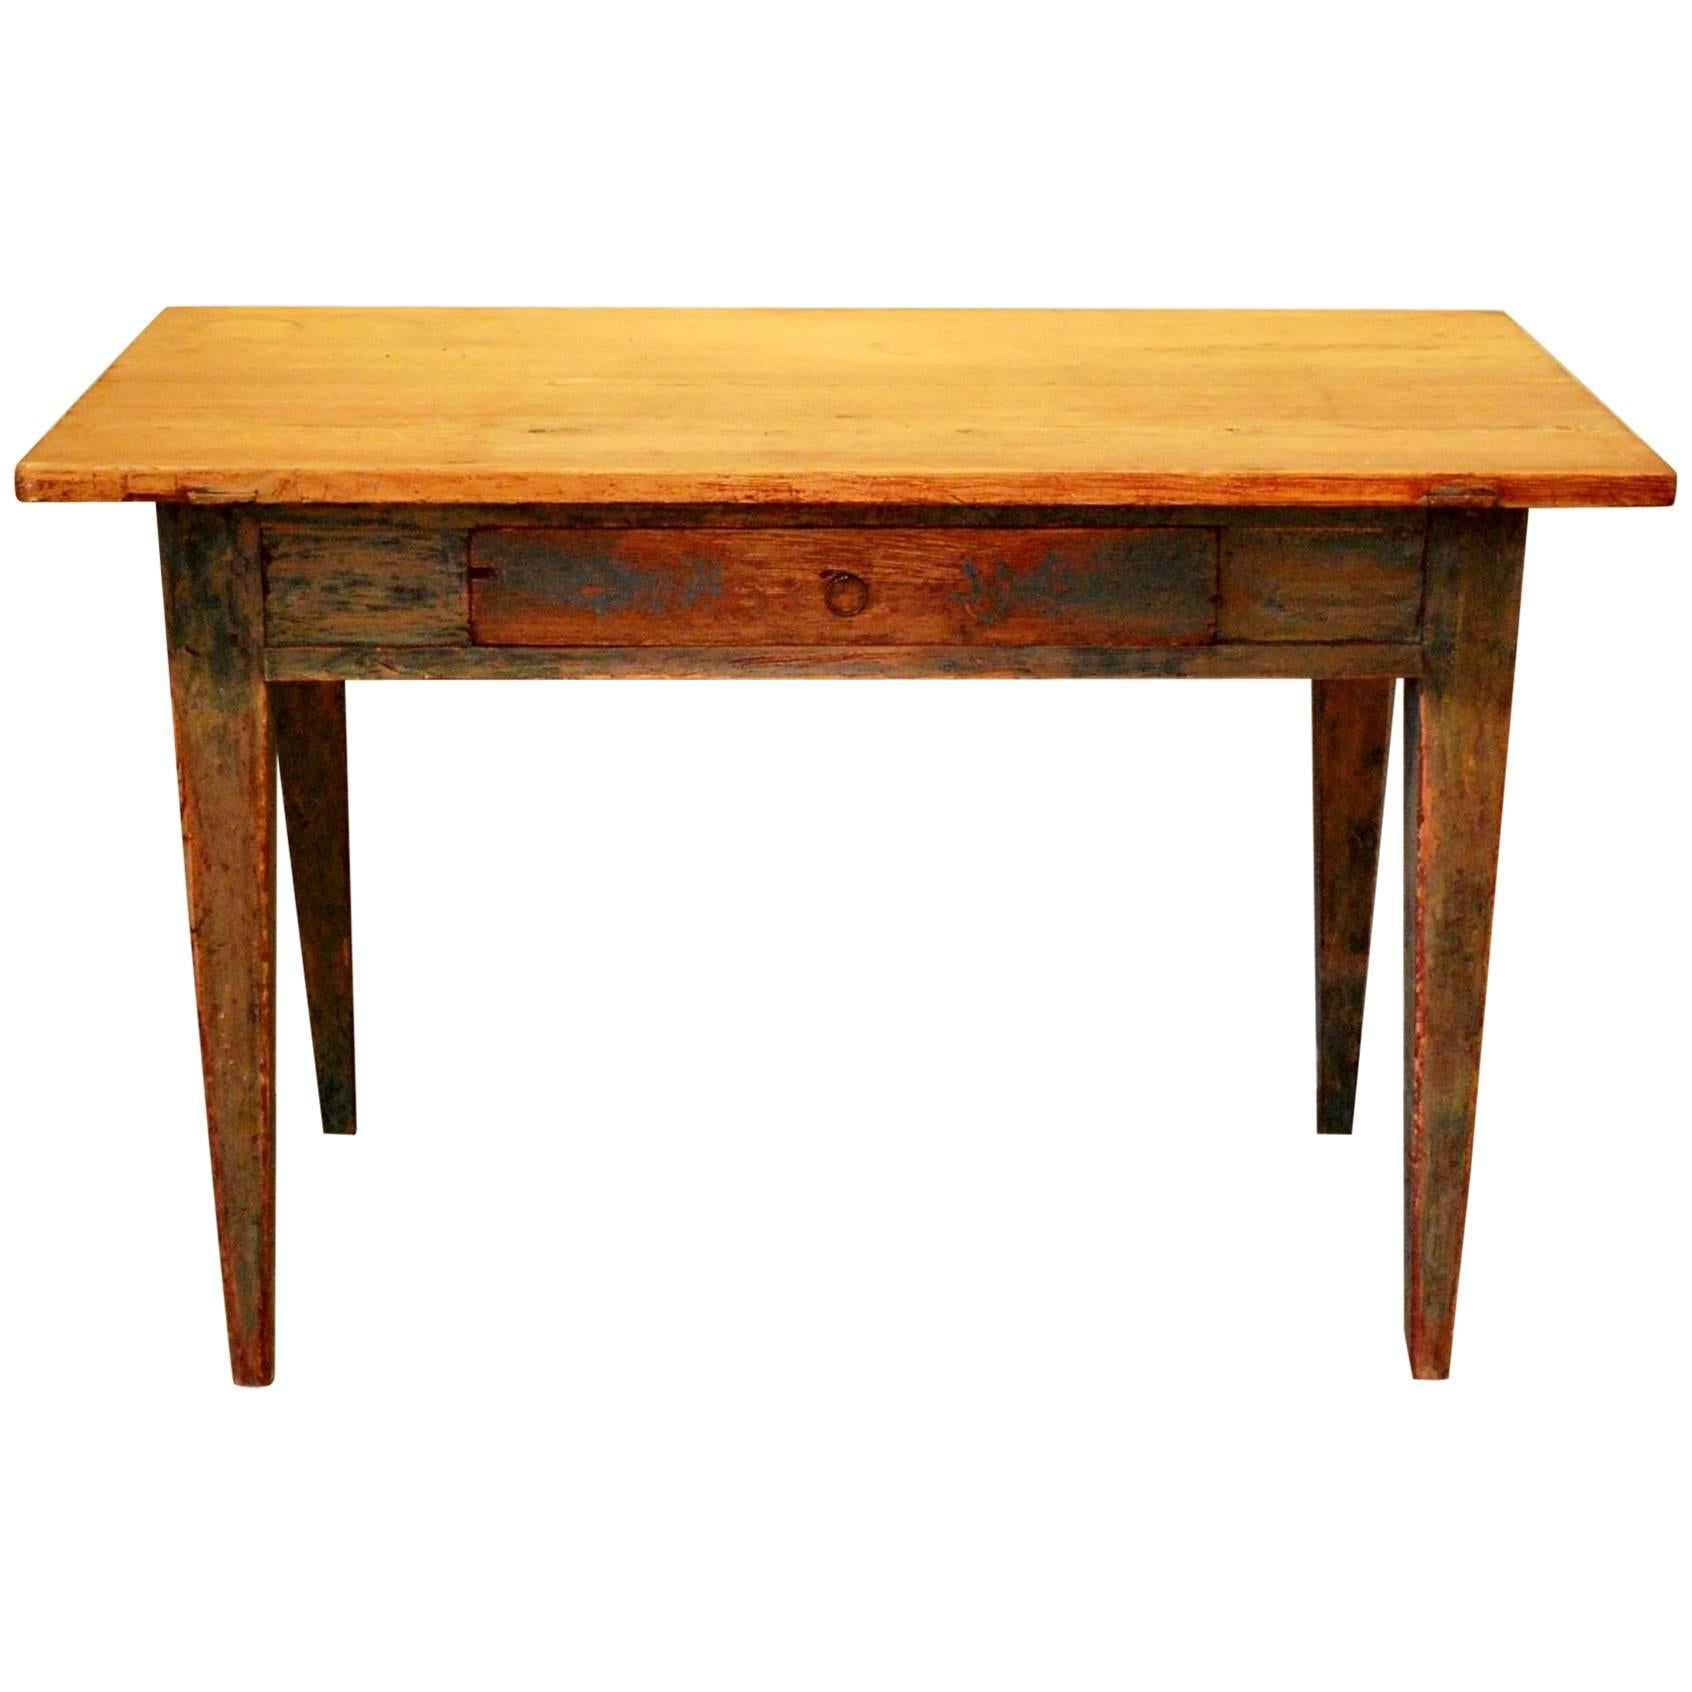 Antique Swedish Painted Writing Table with One Drawer, circa 1830